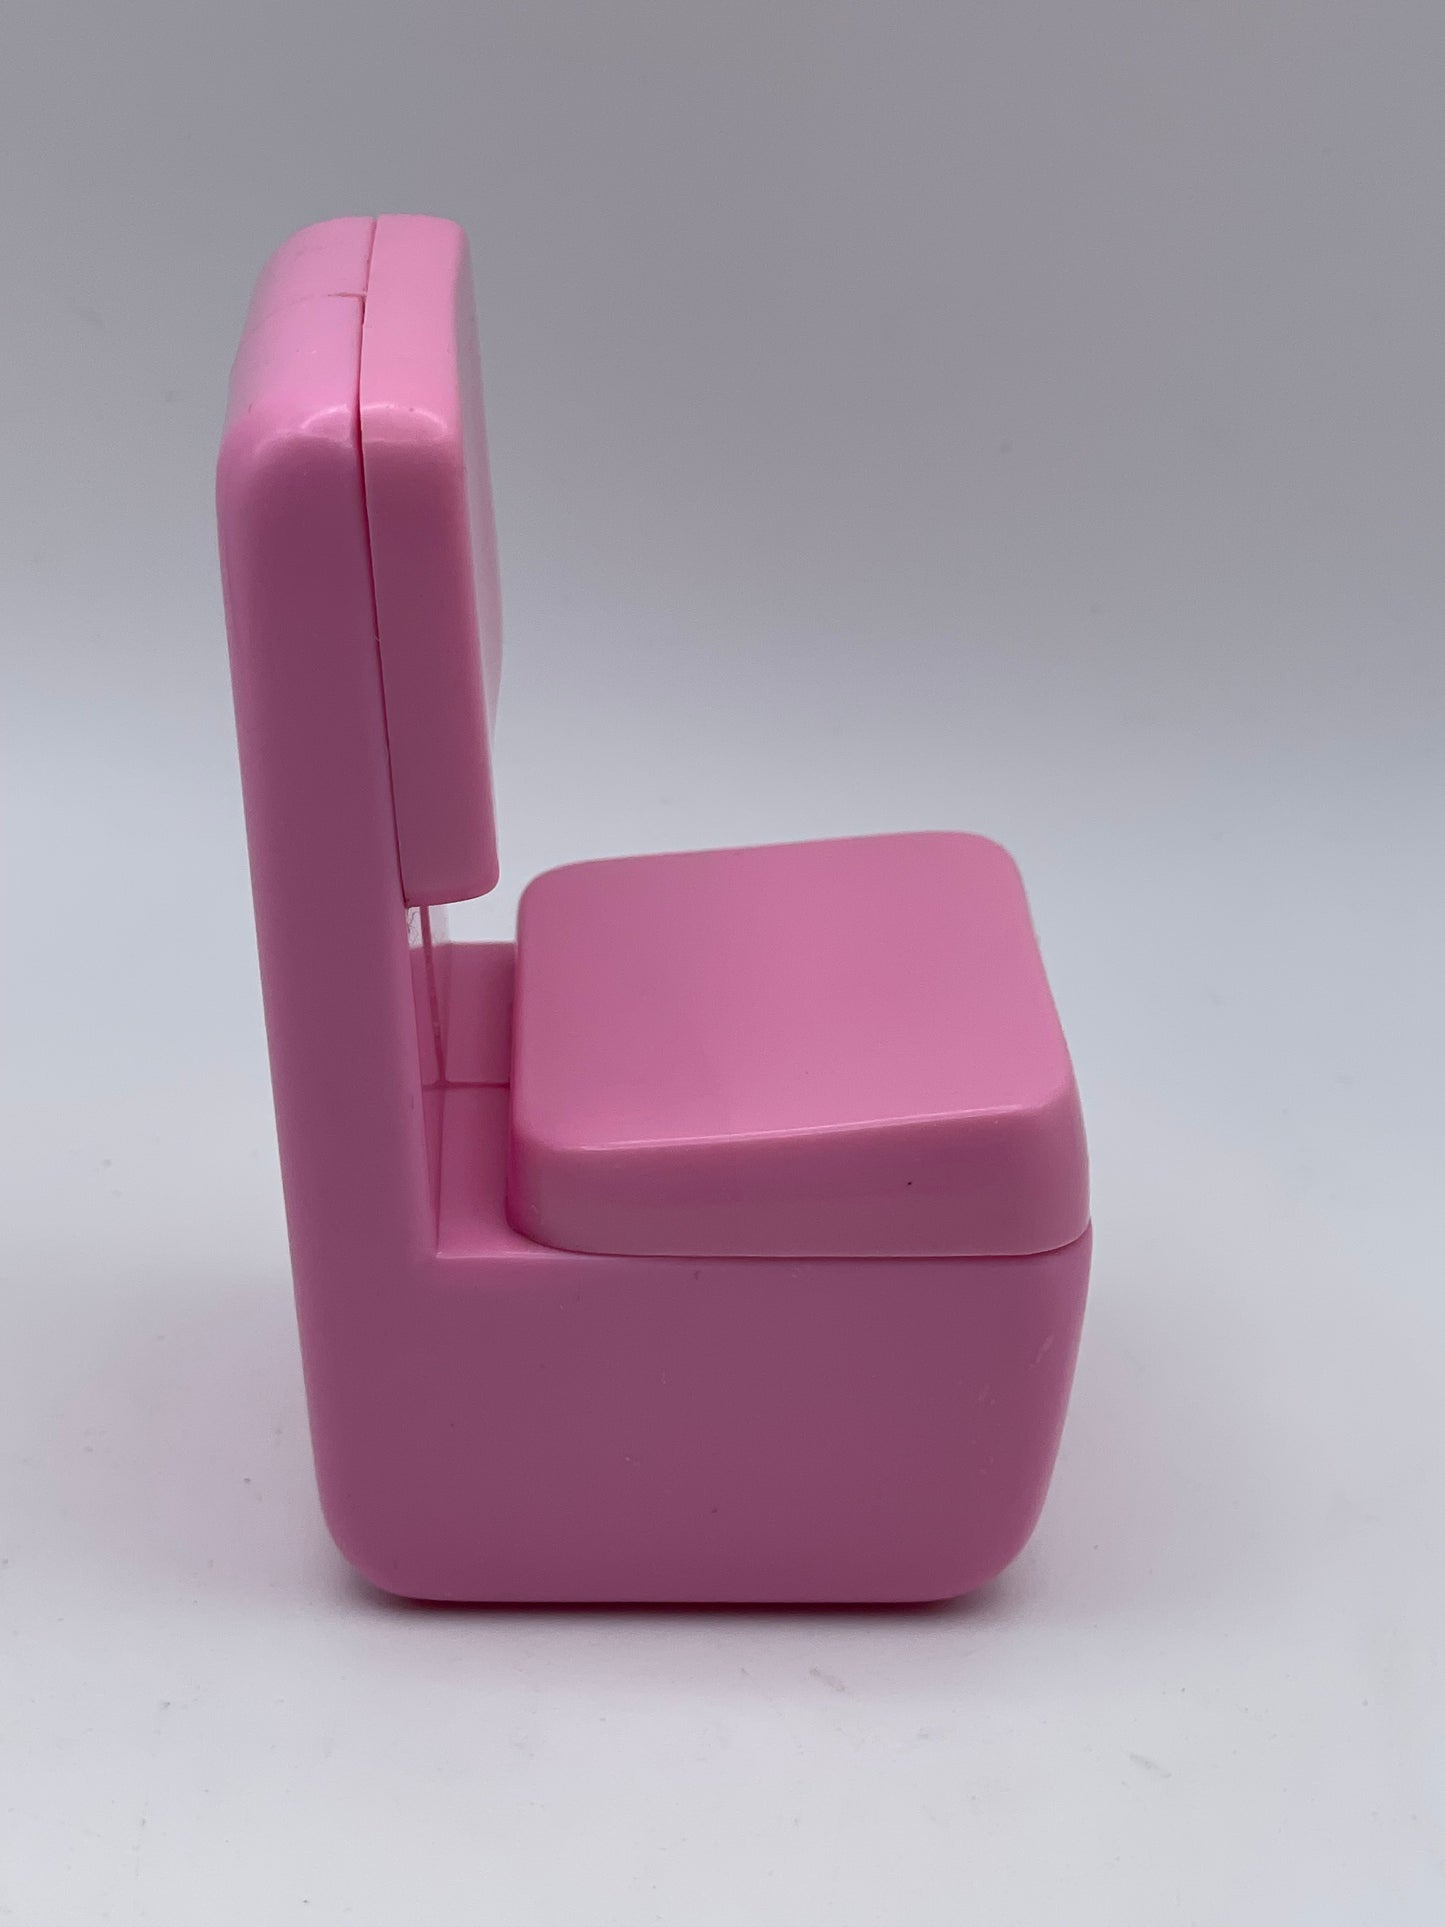 Fisher Price - Loving Family - Pink Chair 1990s #103014